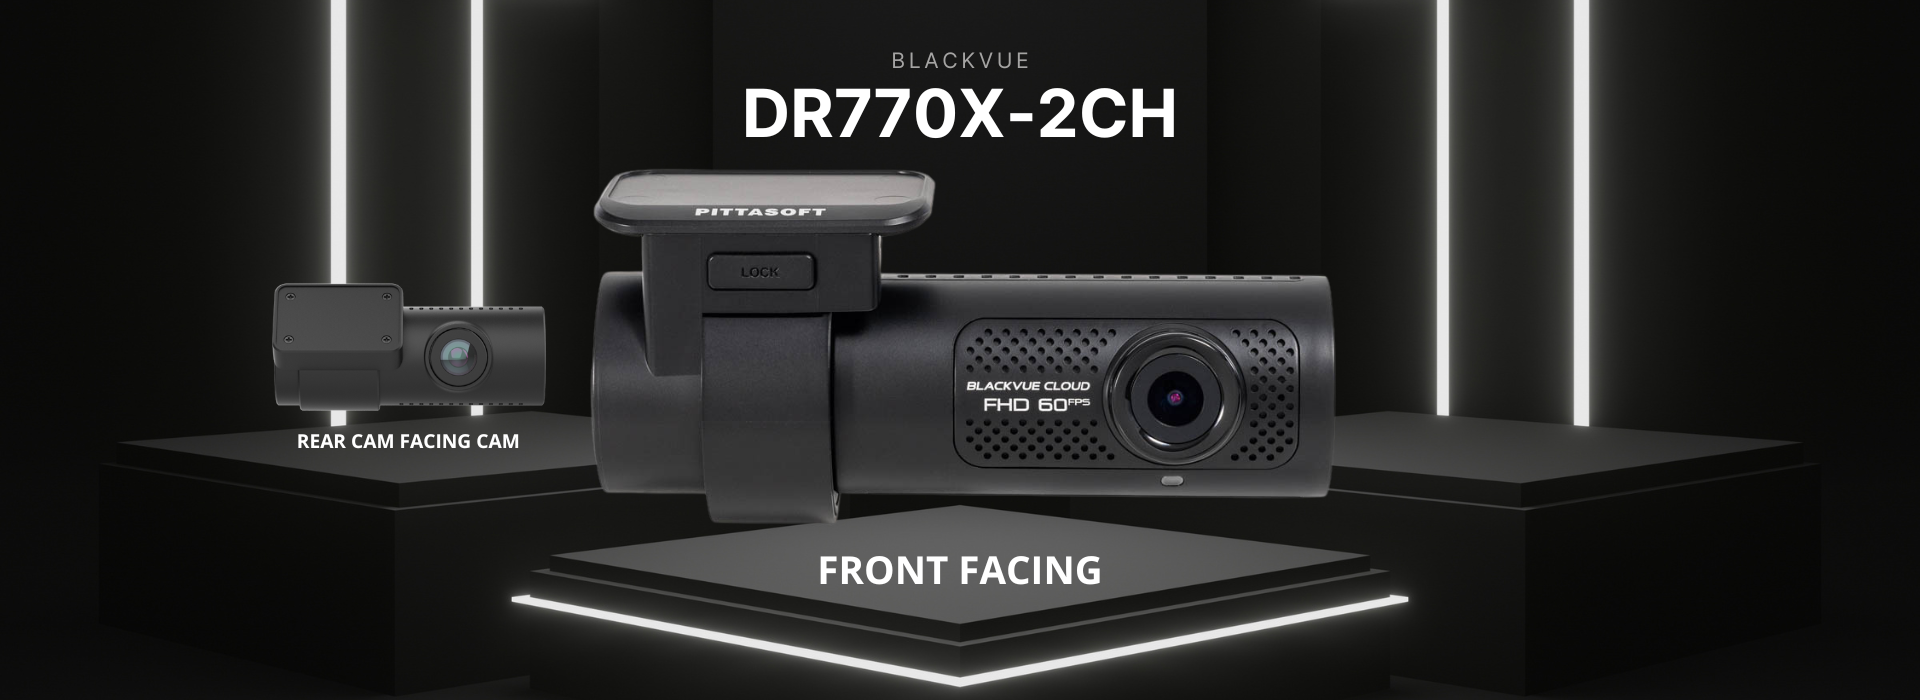 https://www.thedashcamstore.com/content/images/DR770X-2CH-Banner.png